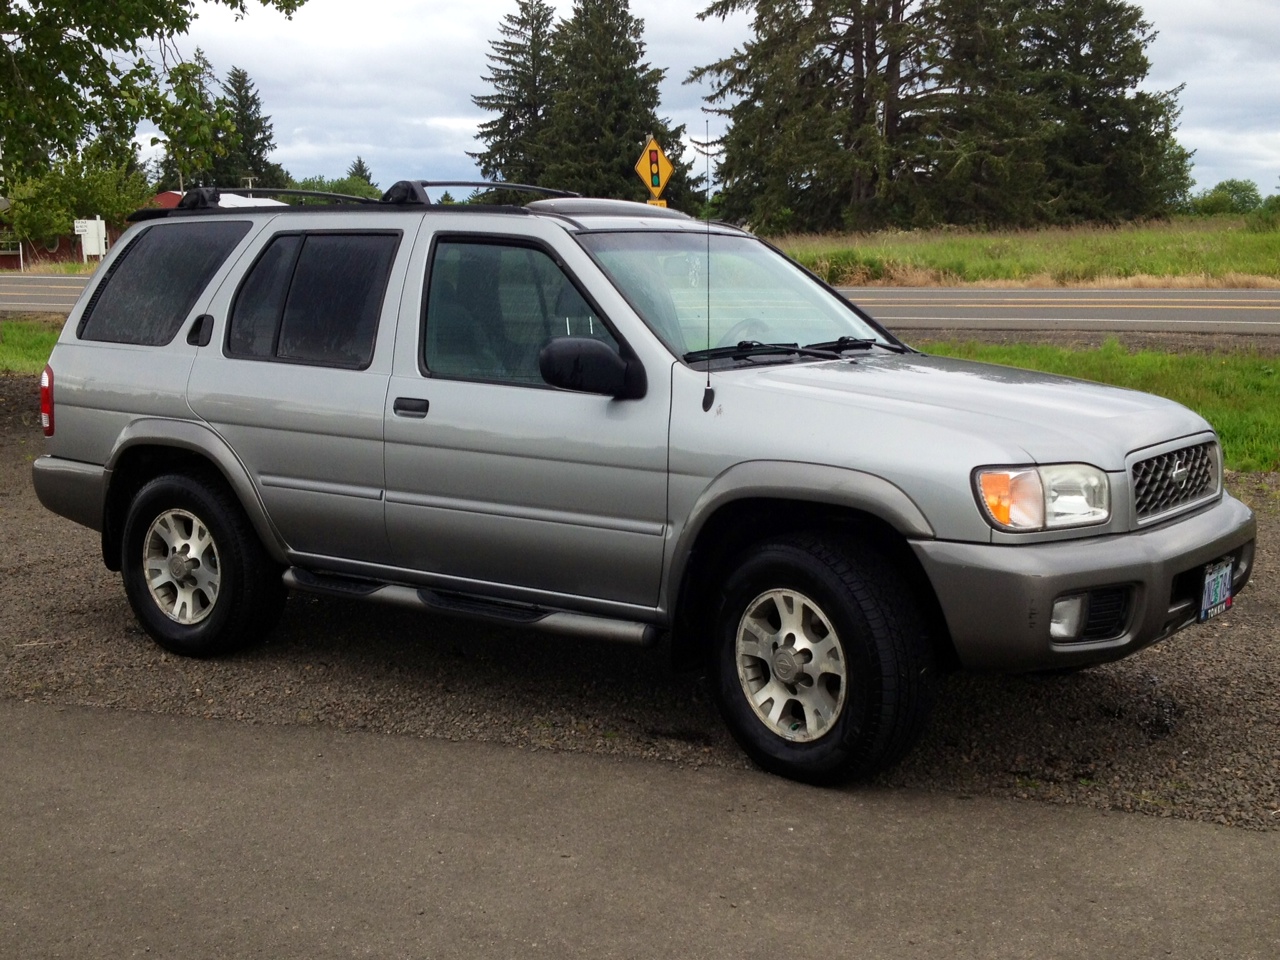 Is the 2001 nissan pathfinder a good car